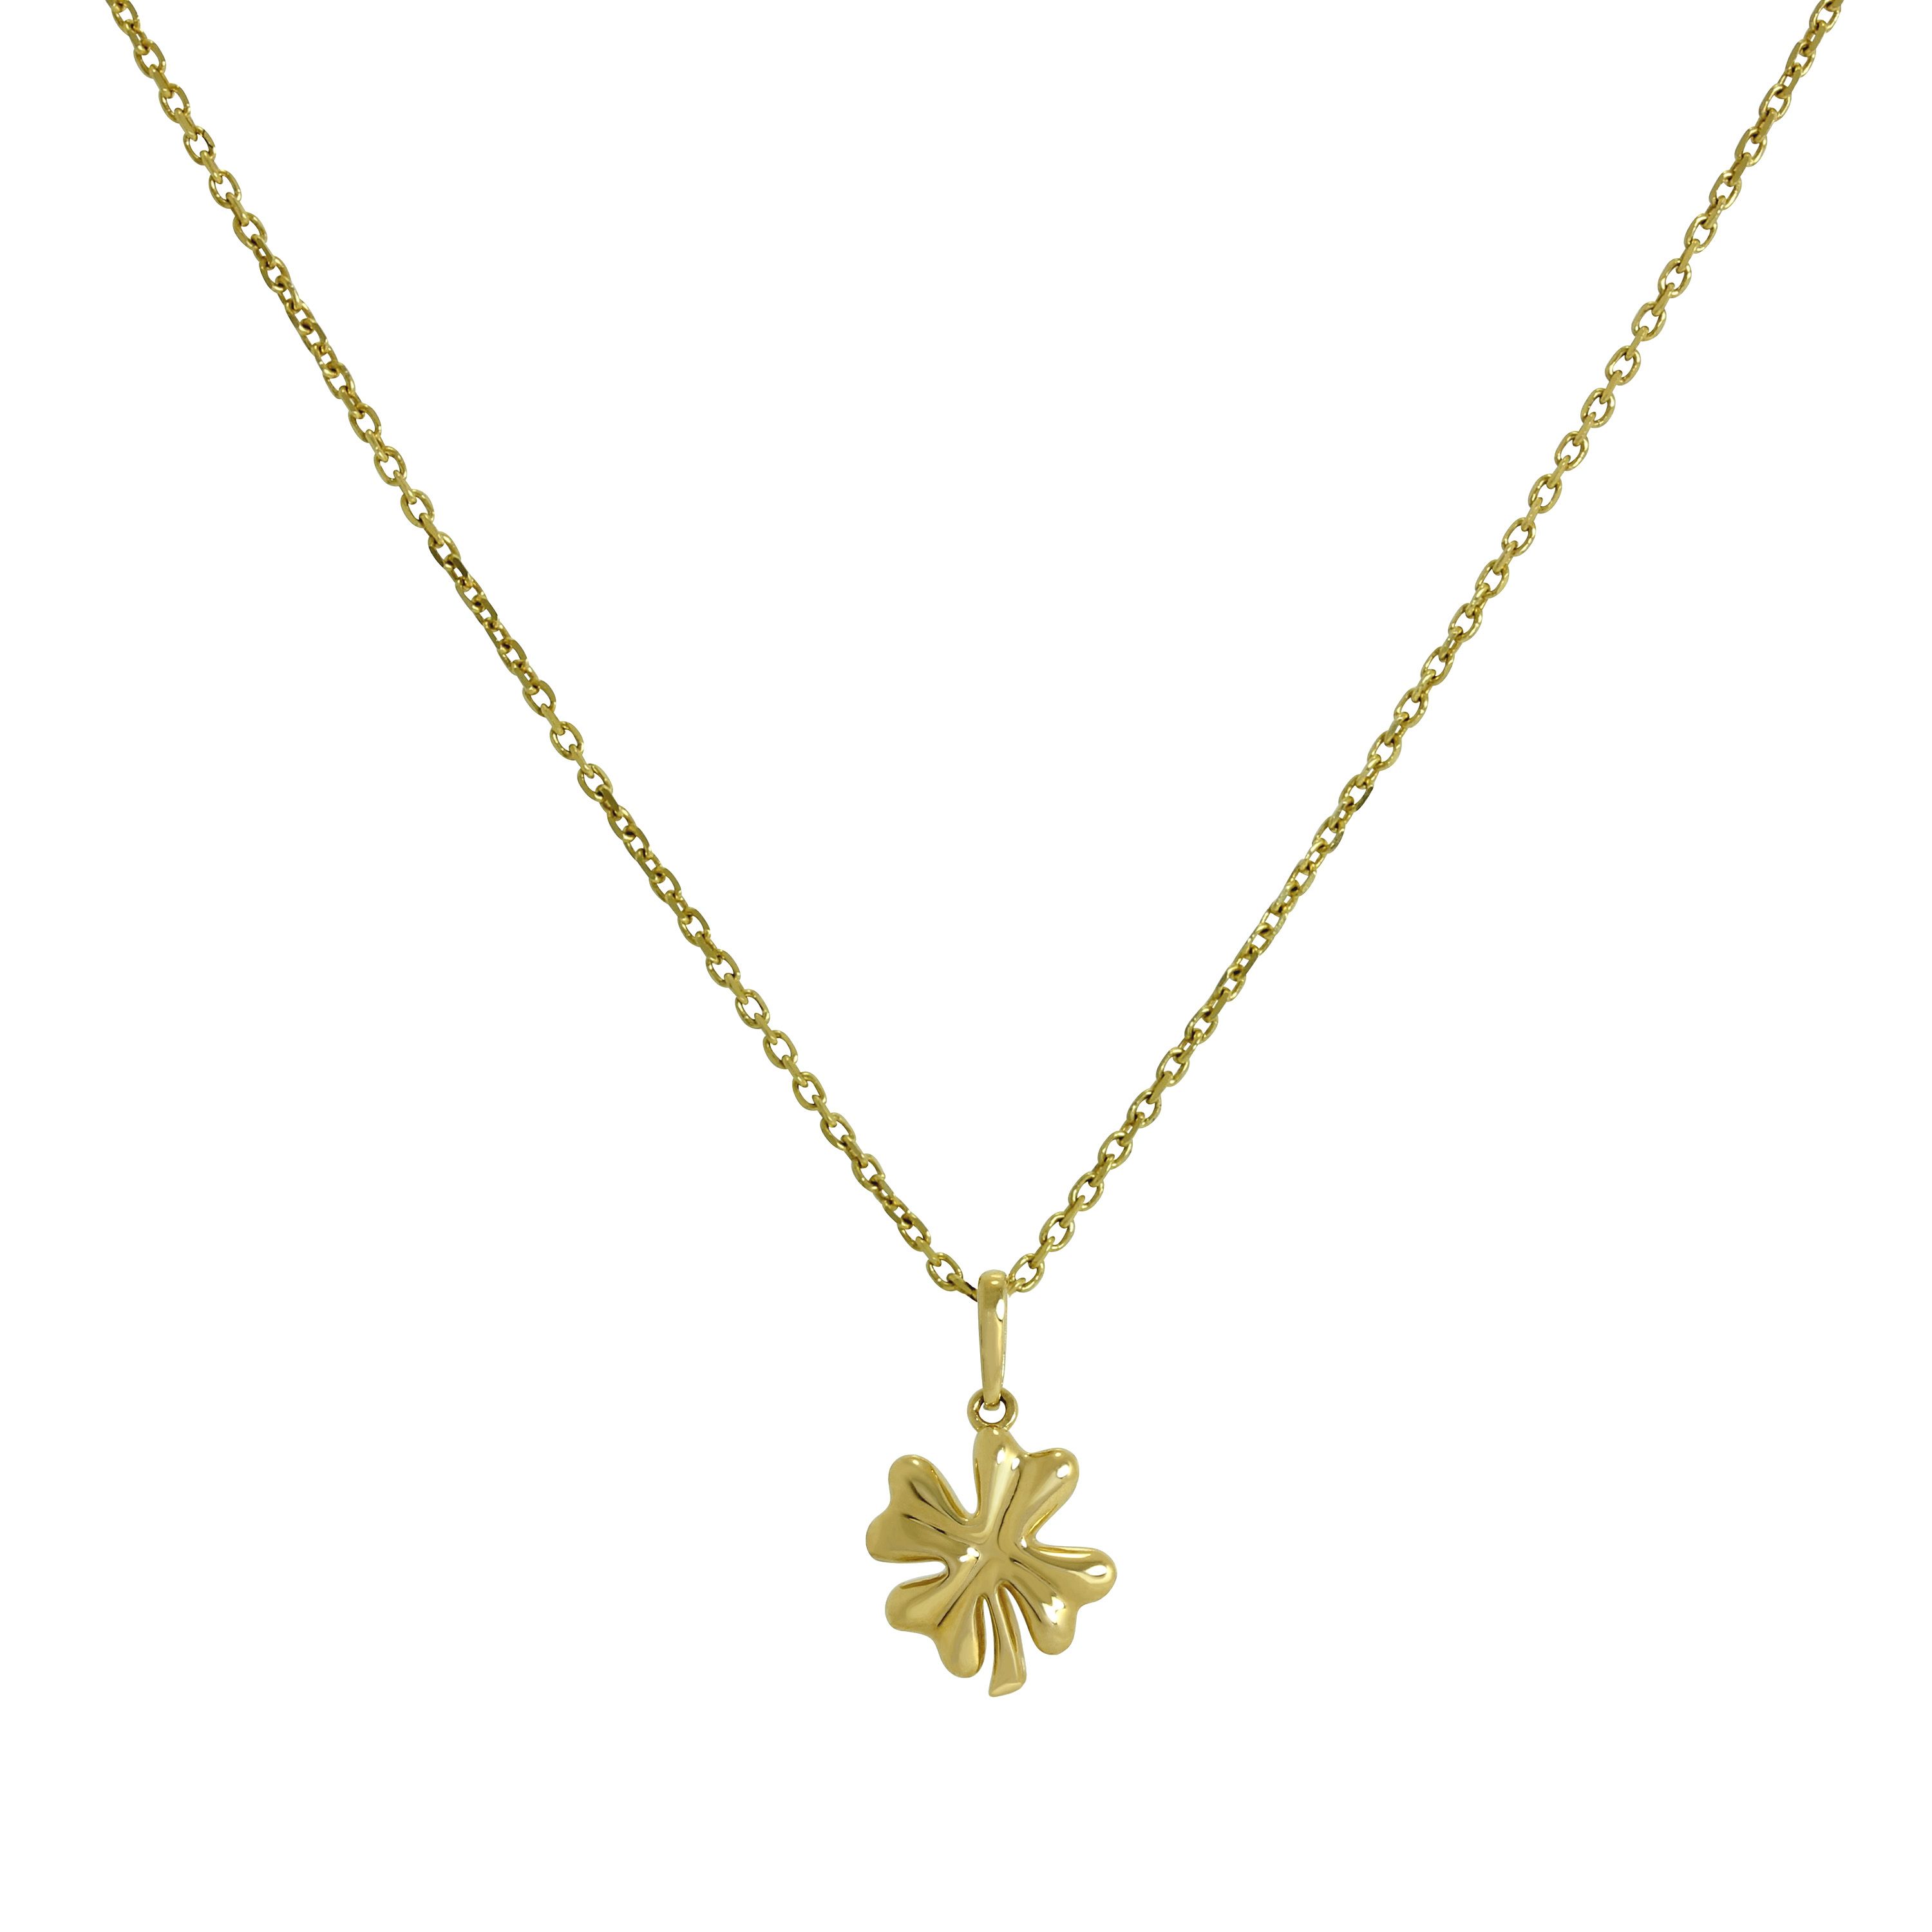 Details About Real 375 9ct Gold Four Leaf Clover Necklace 16 – 20 Inches  Good Luck Pertaining To Most Up To Date Lucky Four Leaf Clover Y  Necklaces (View 11 of 25)